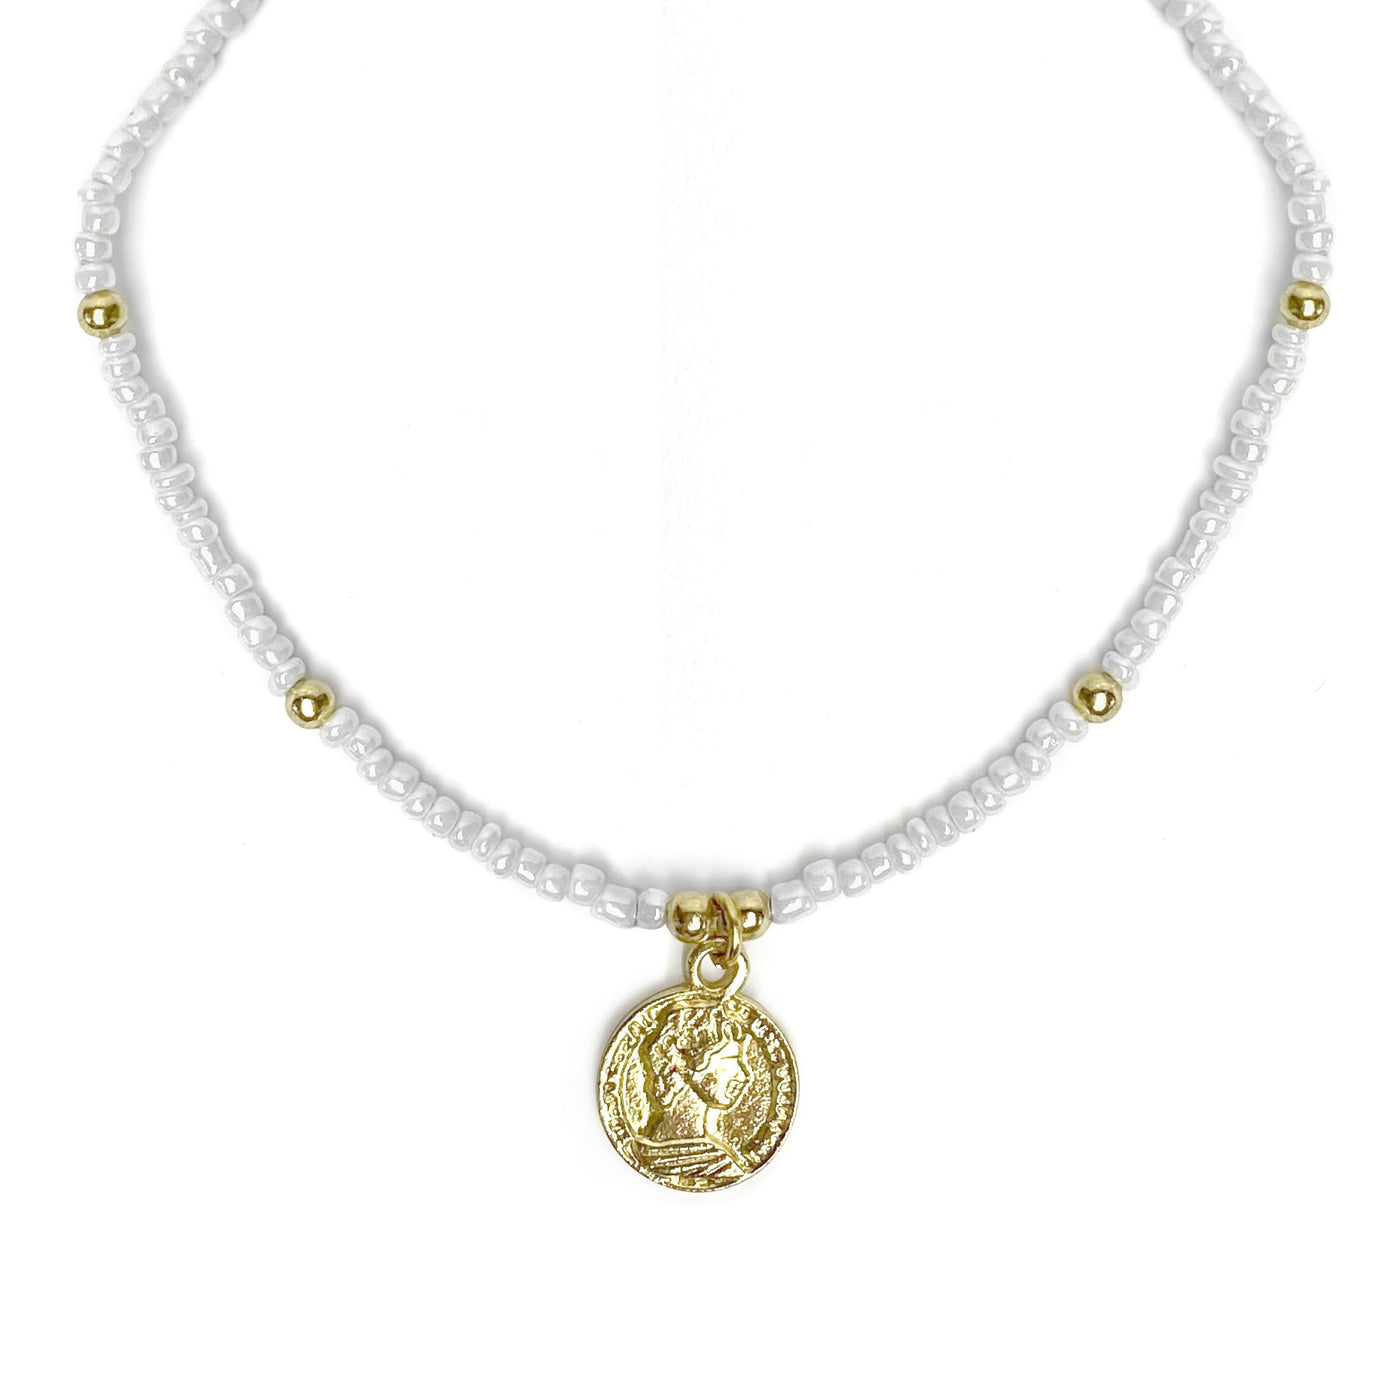 White Glass Bead Choker with Brass Coin Pendant